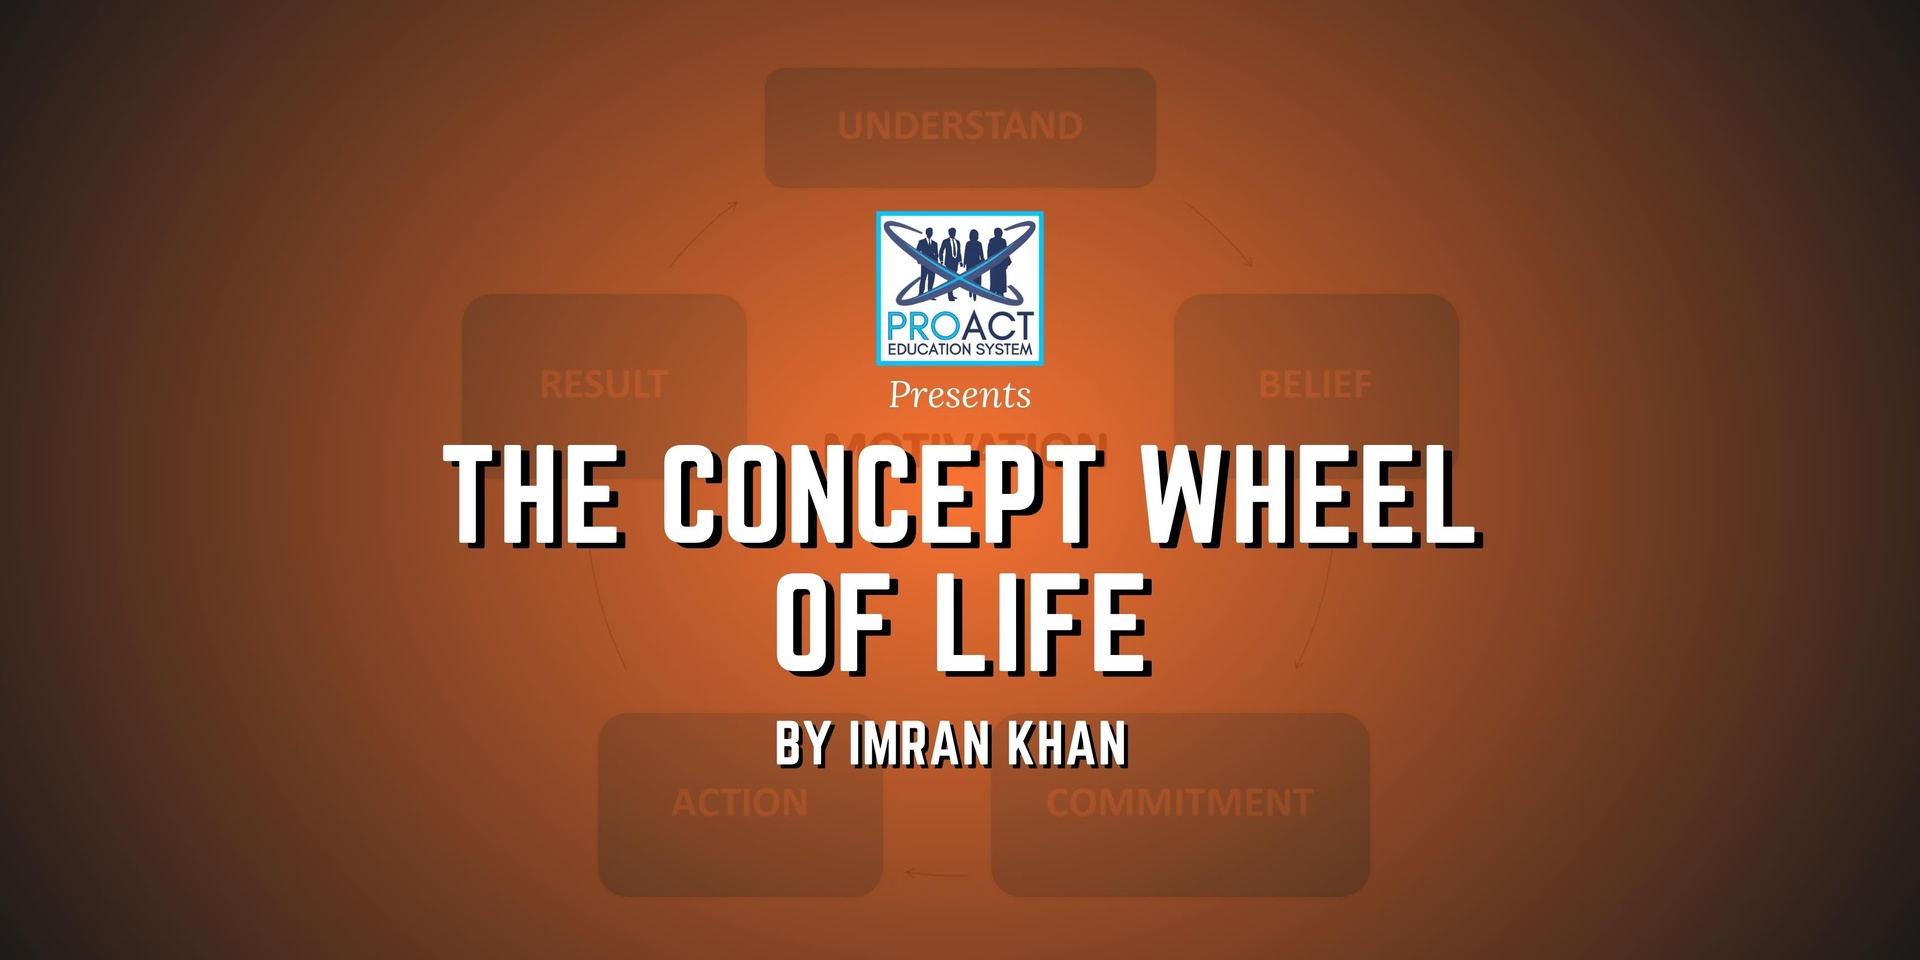 THE CONCEPT WHEEL OF LIFE by IMRAN KHAN